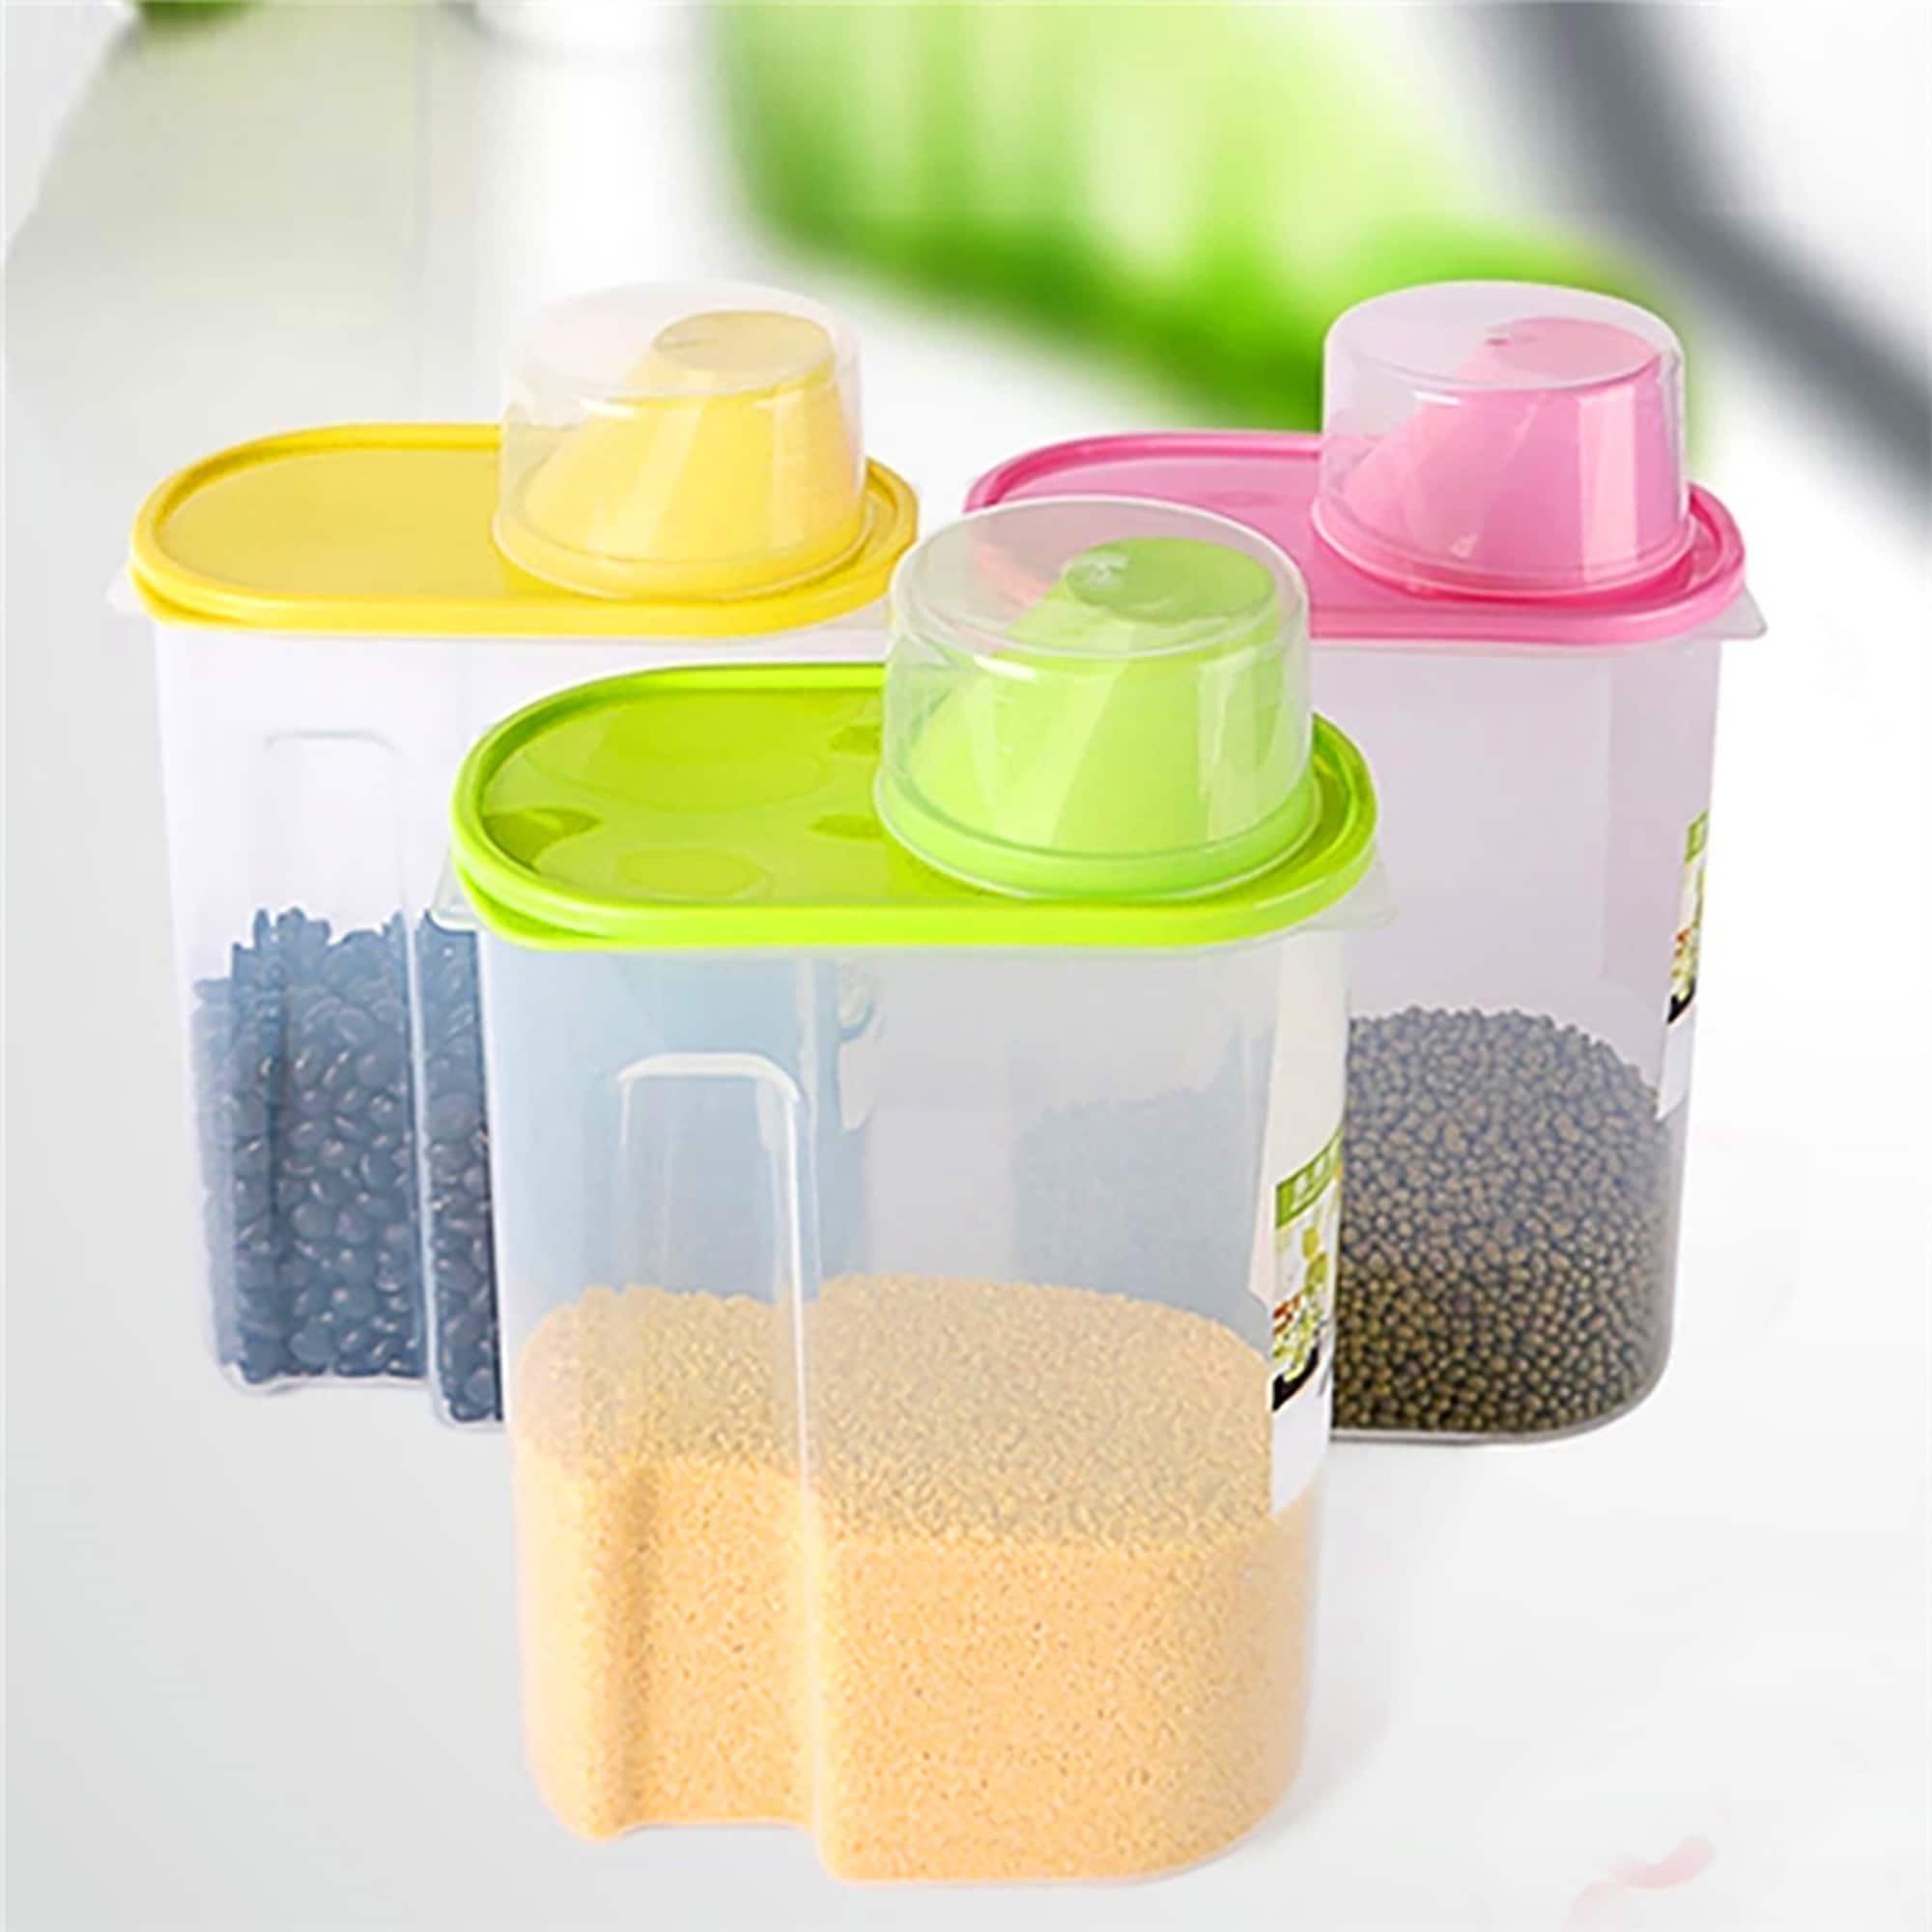 Rubbermaid Cereal Keepers (3 Pack) - Assorted Colors 